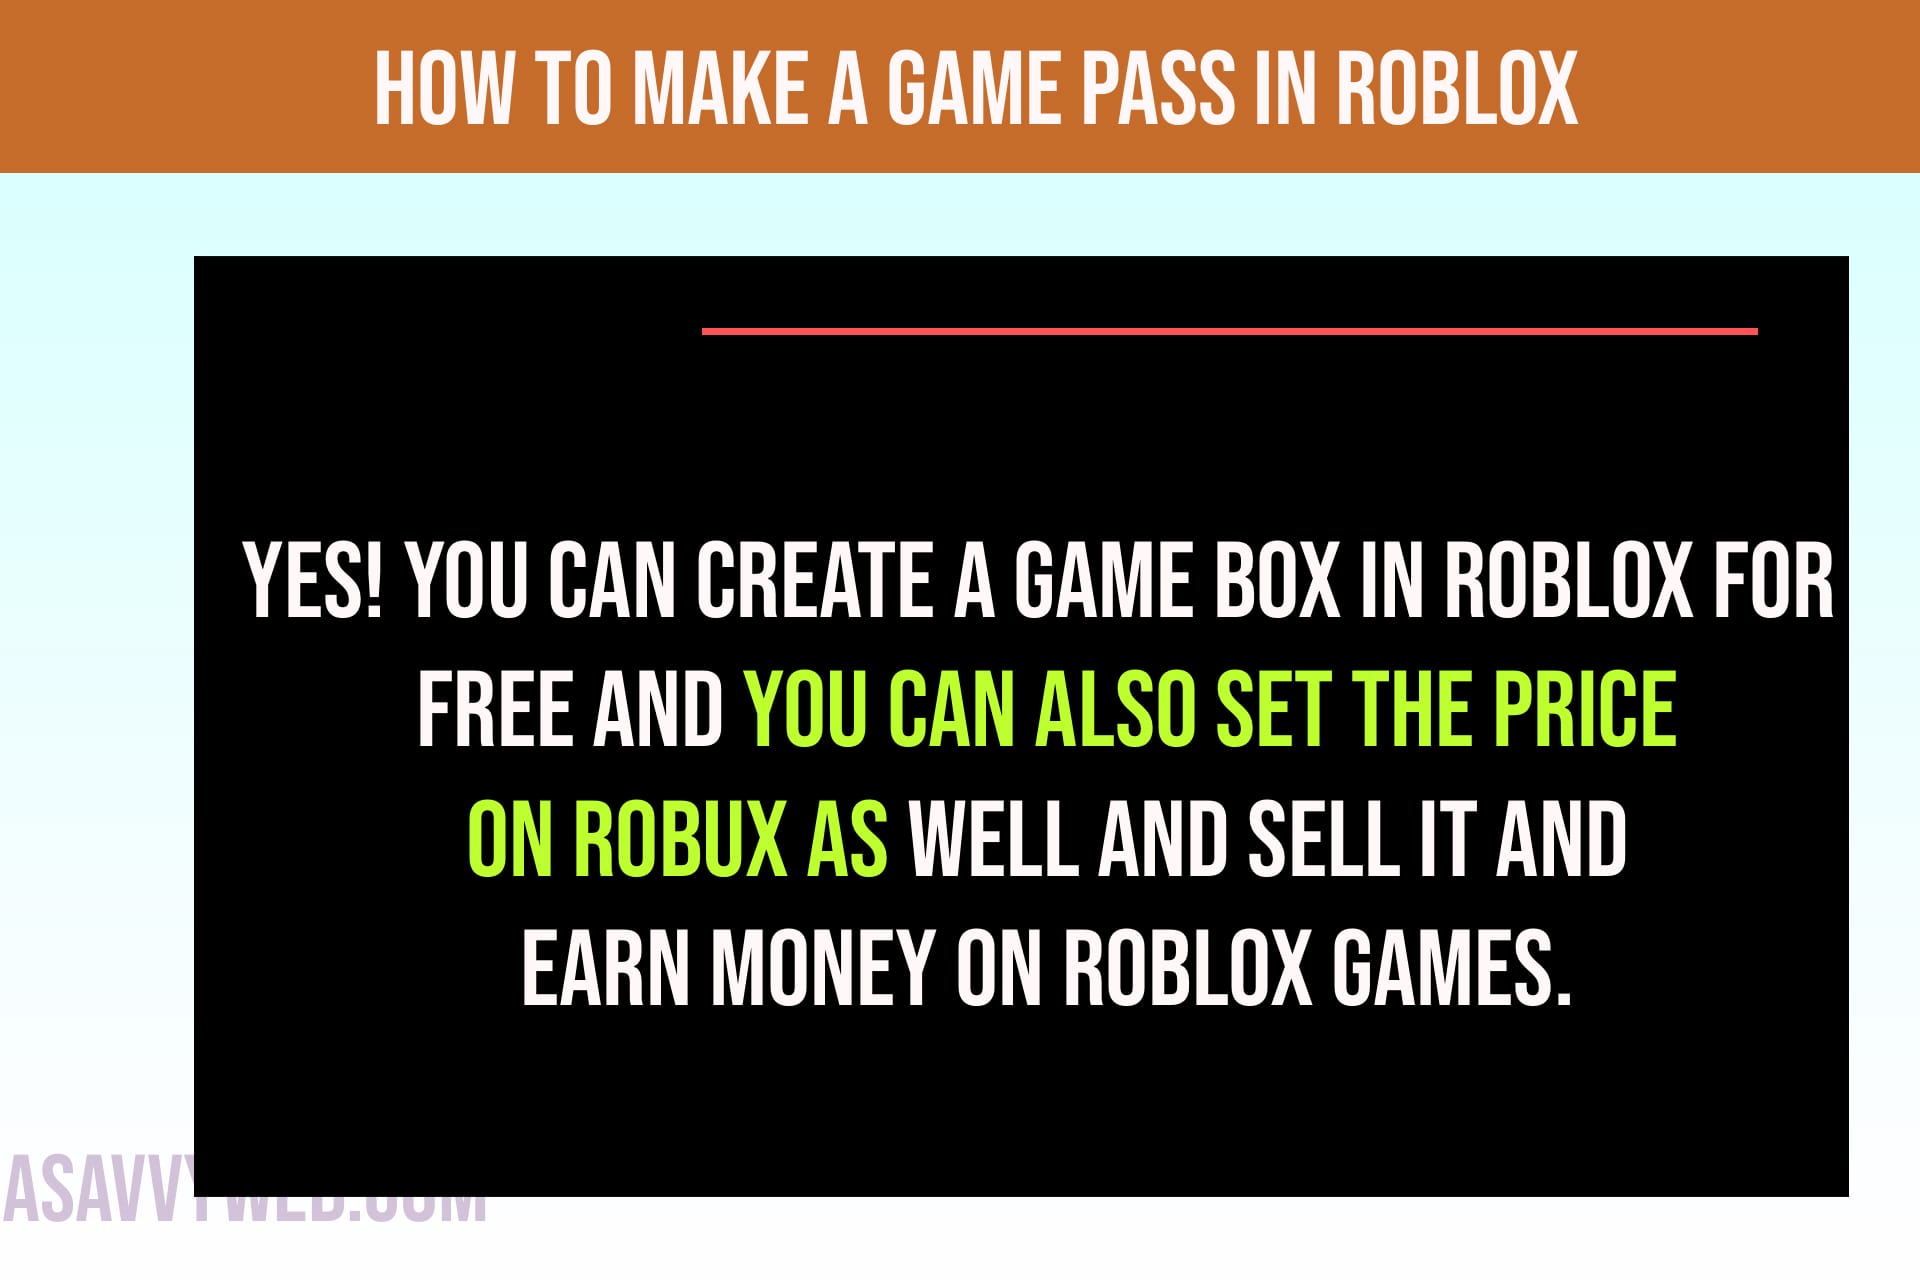 HOW TO MAKE A GAMEPASS IN ROBLOX 2023